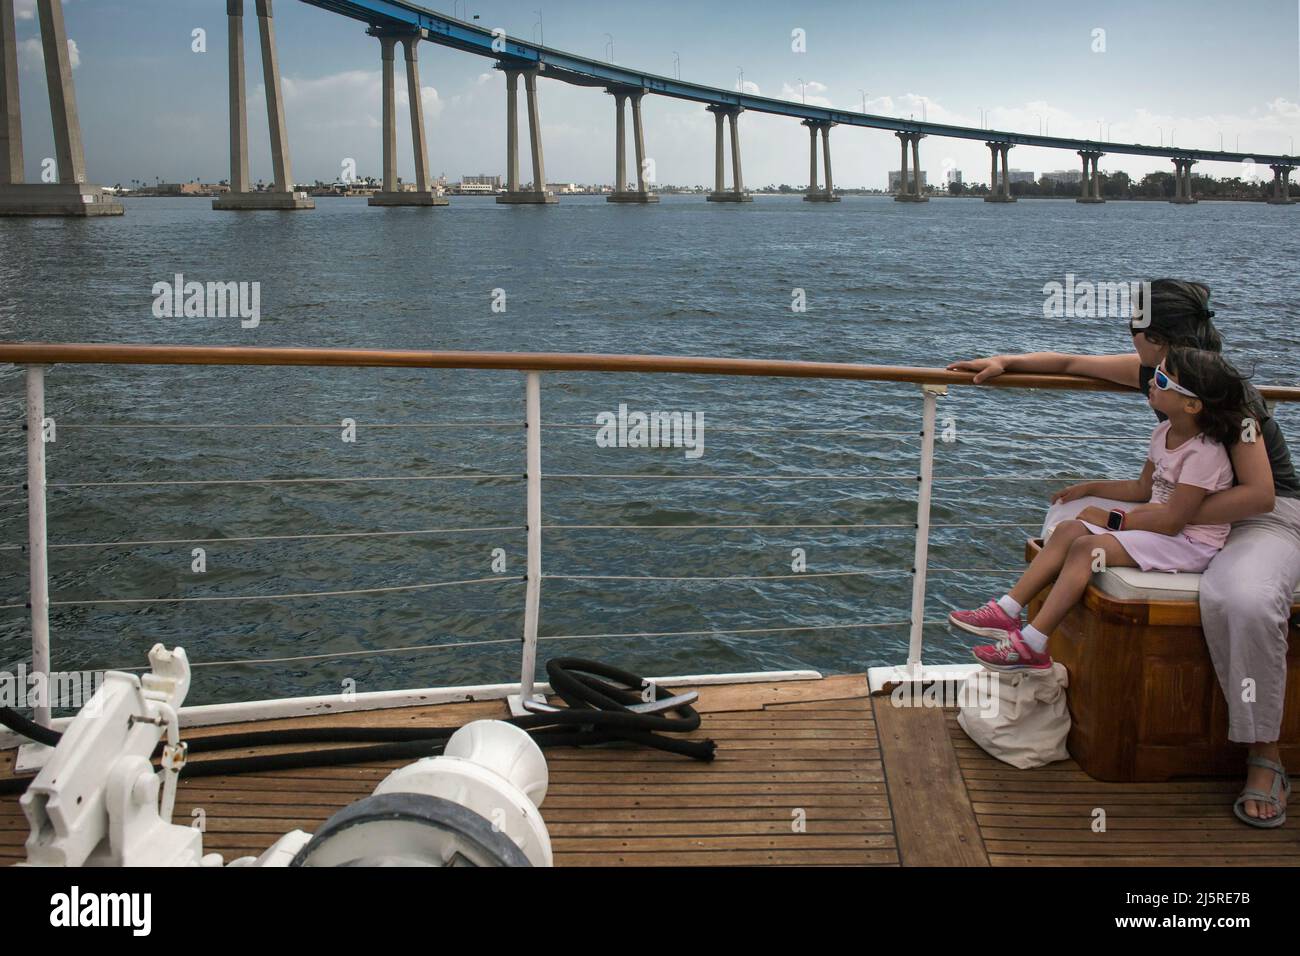 Mother and child contemplating Coronado Bridge from a sightseeing cruise through San Diego South Bay Stock Photo